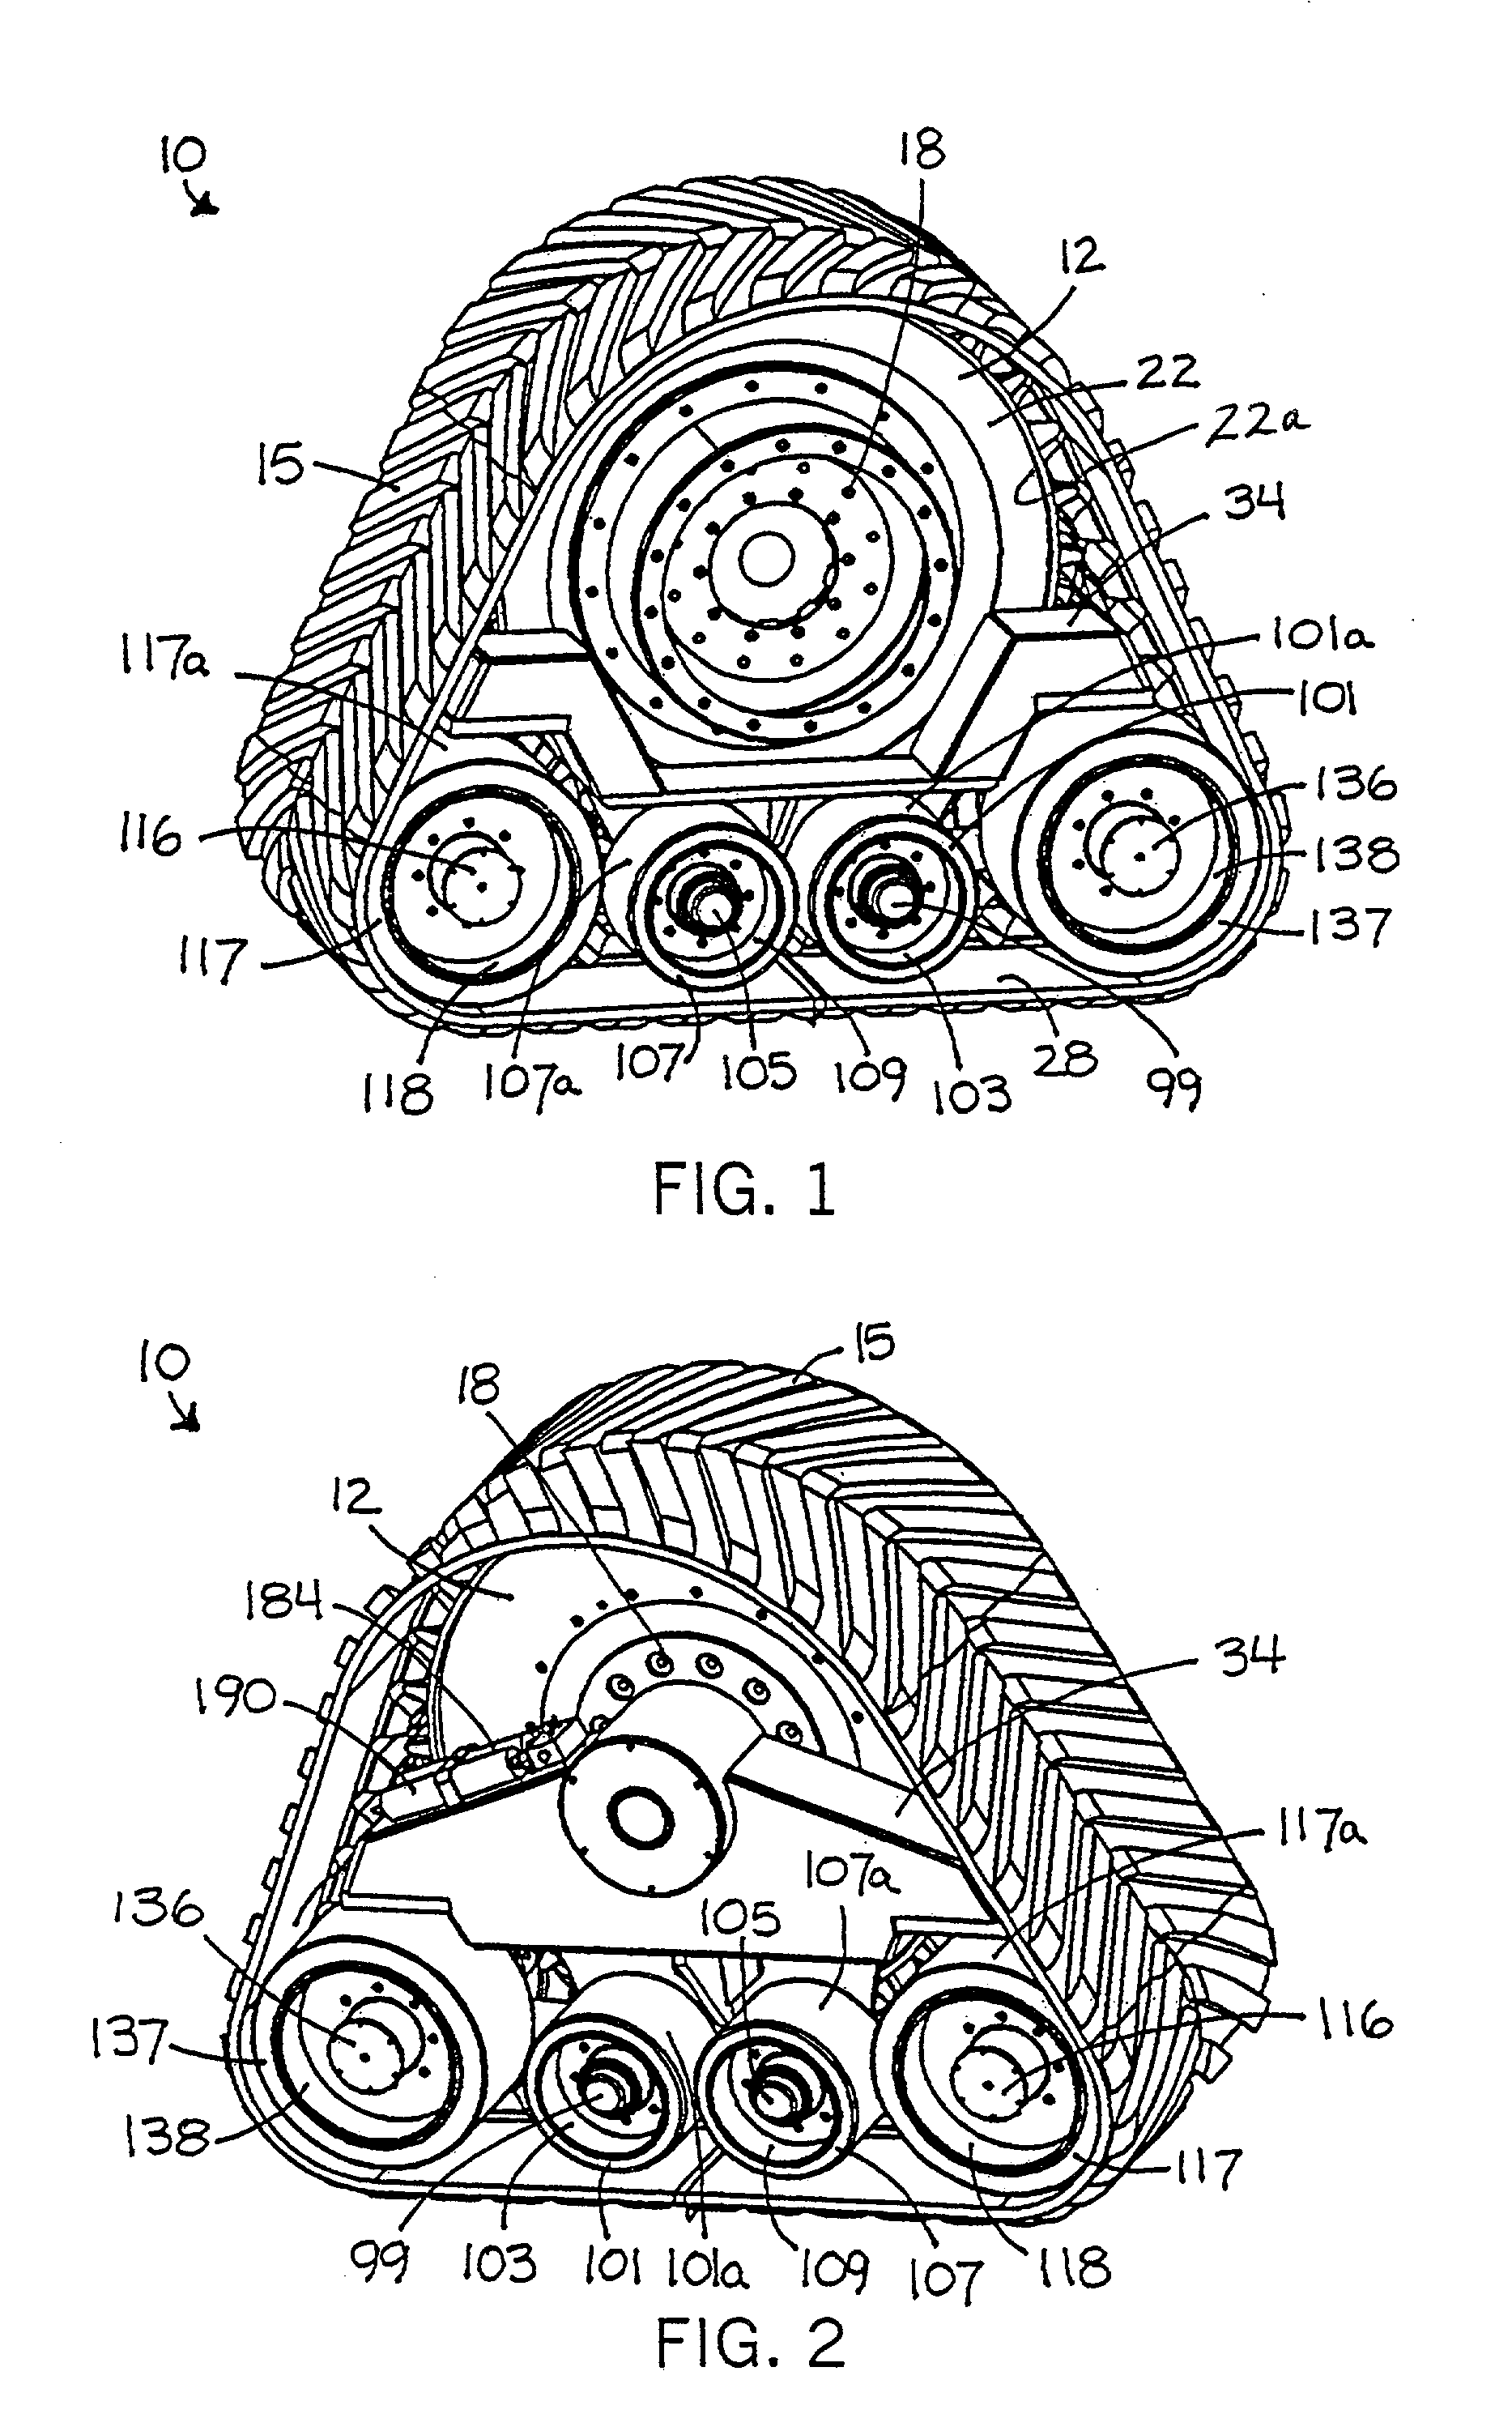 Drive wheel for track apparatus